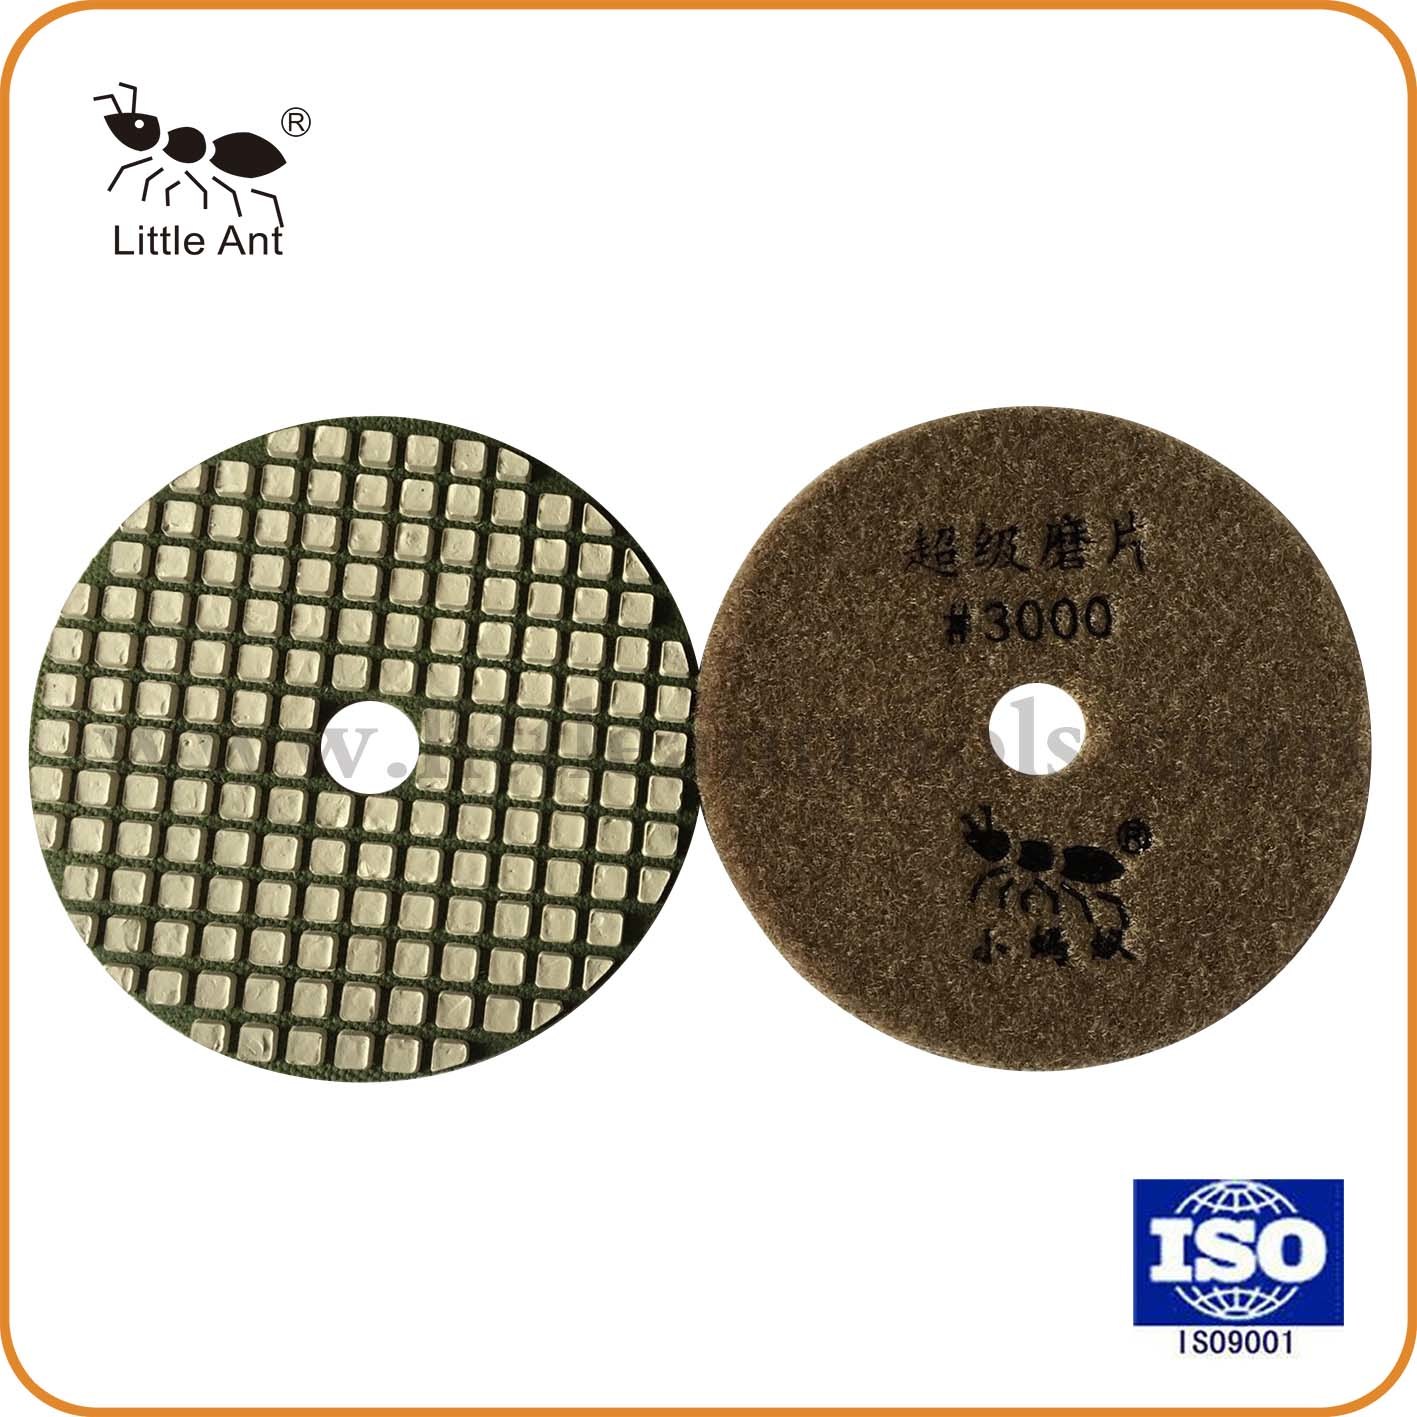 4 Inch Super Diamond Dry Polishing Pad for Counter-Top and Concrete